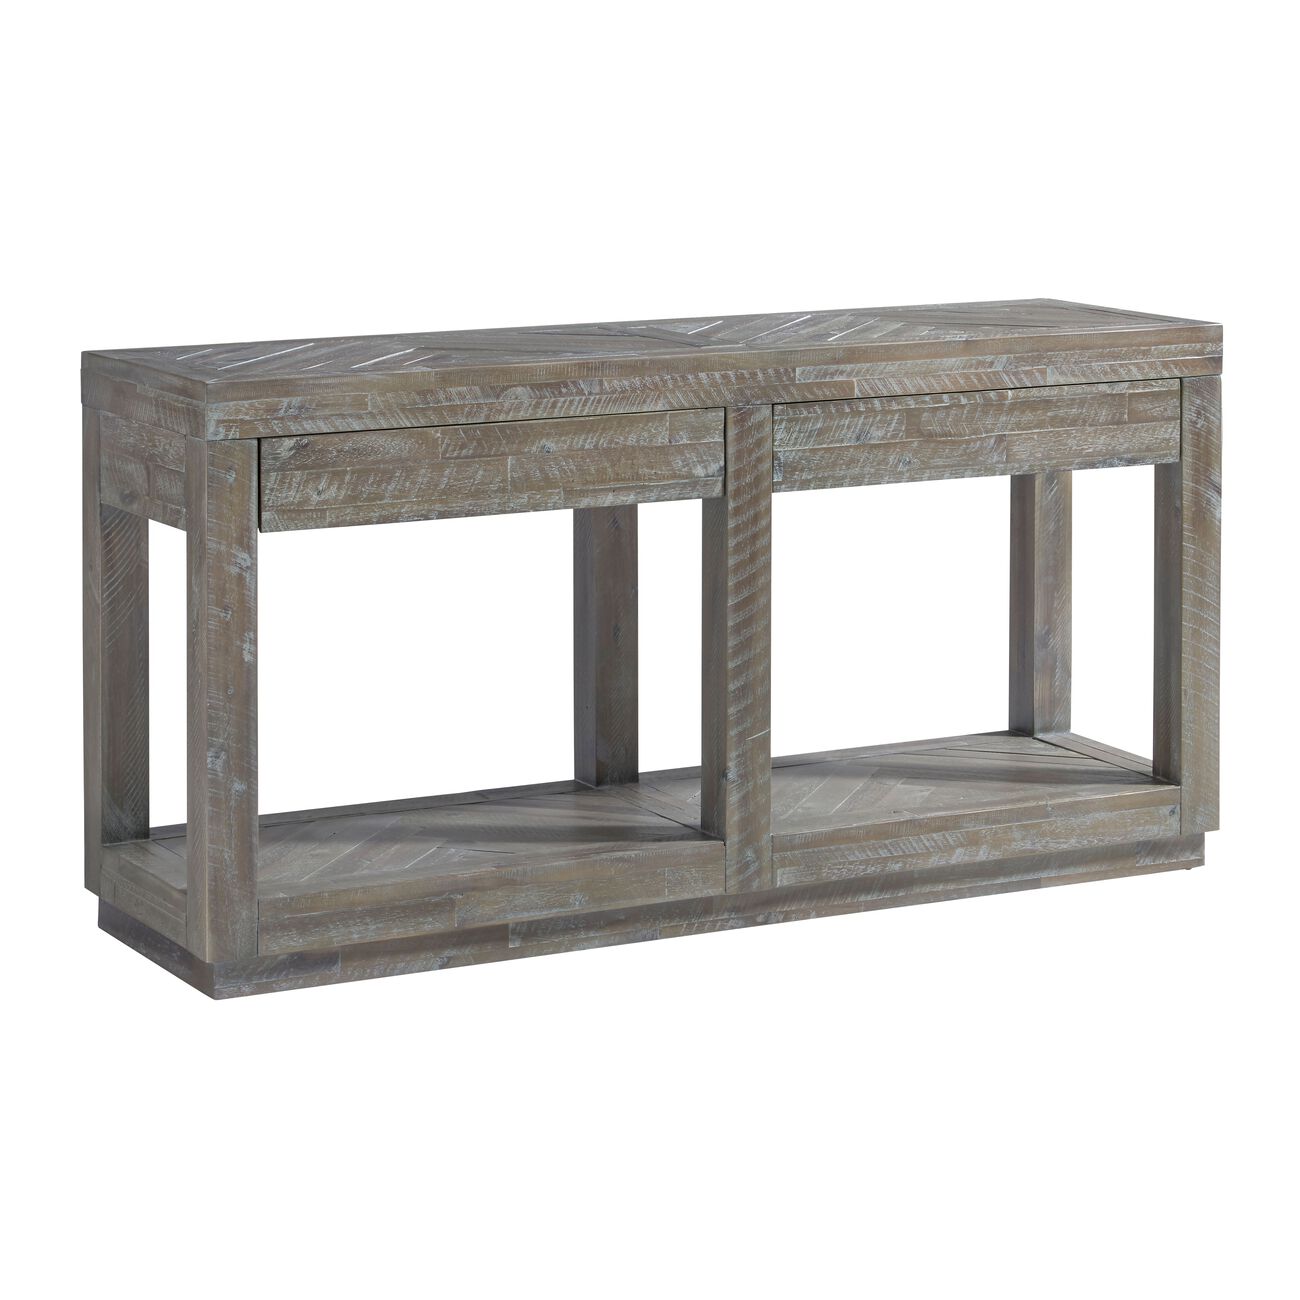 Two Drawer and Bottom Shelf Console Table with Flattened Base, Rustic Latte Gray